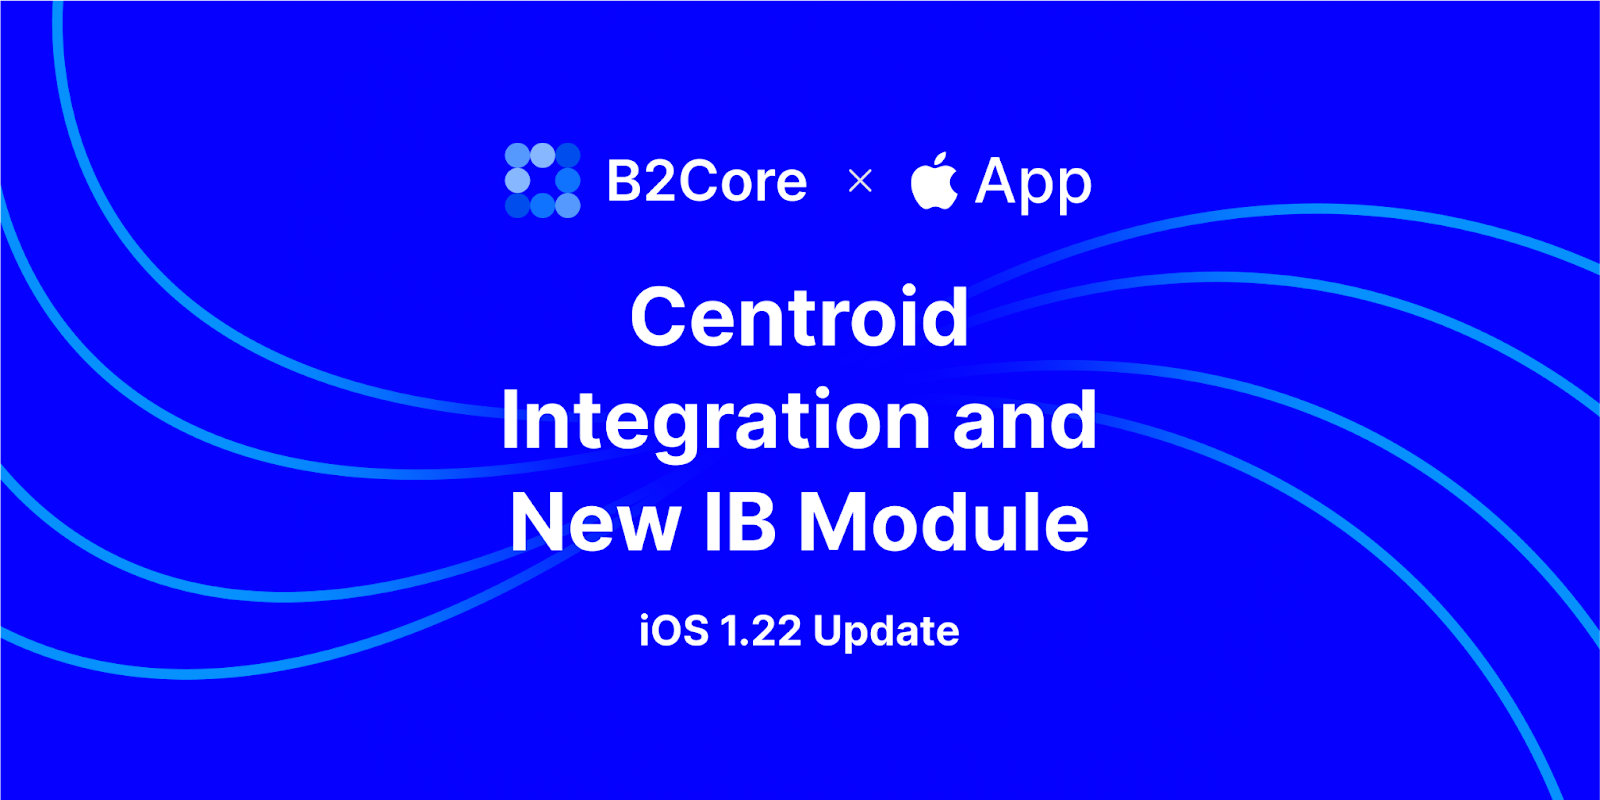 B2Core iOS Update: Increasing Productivity with a New Centroid Integration